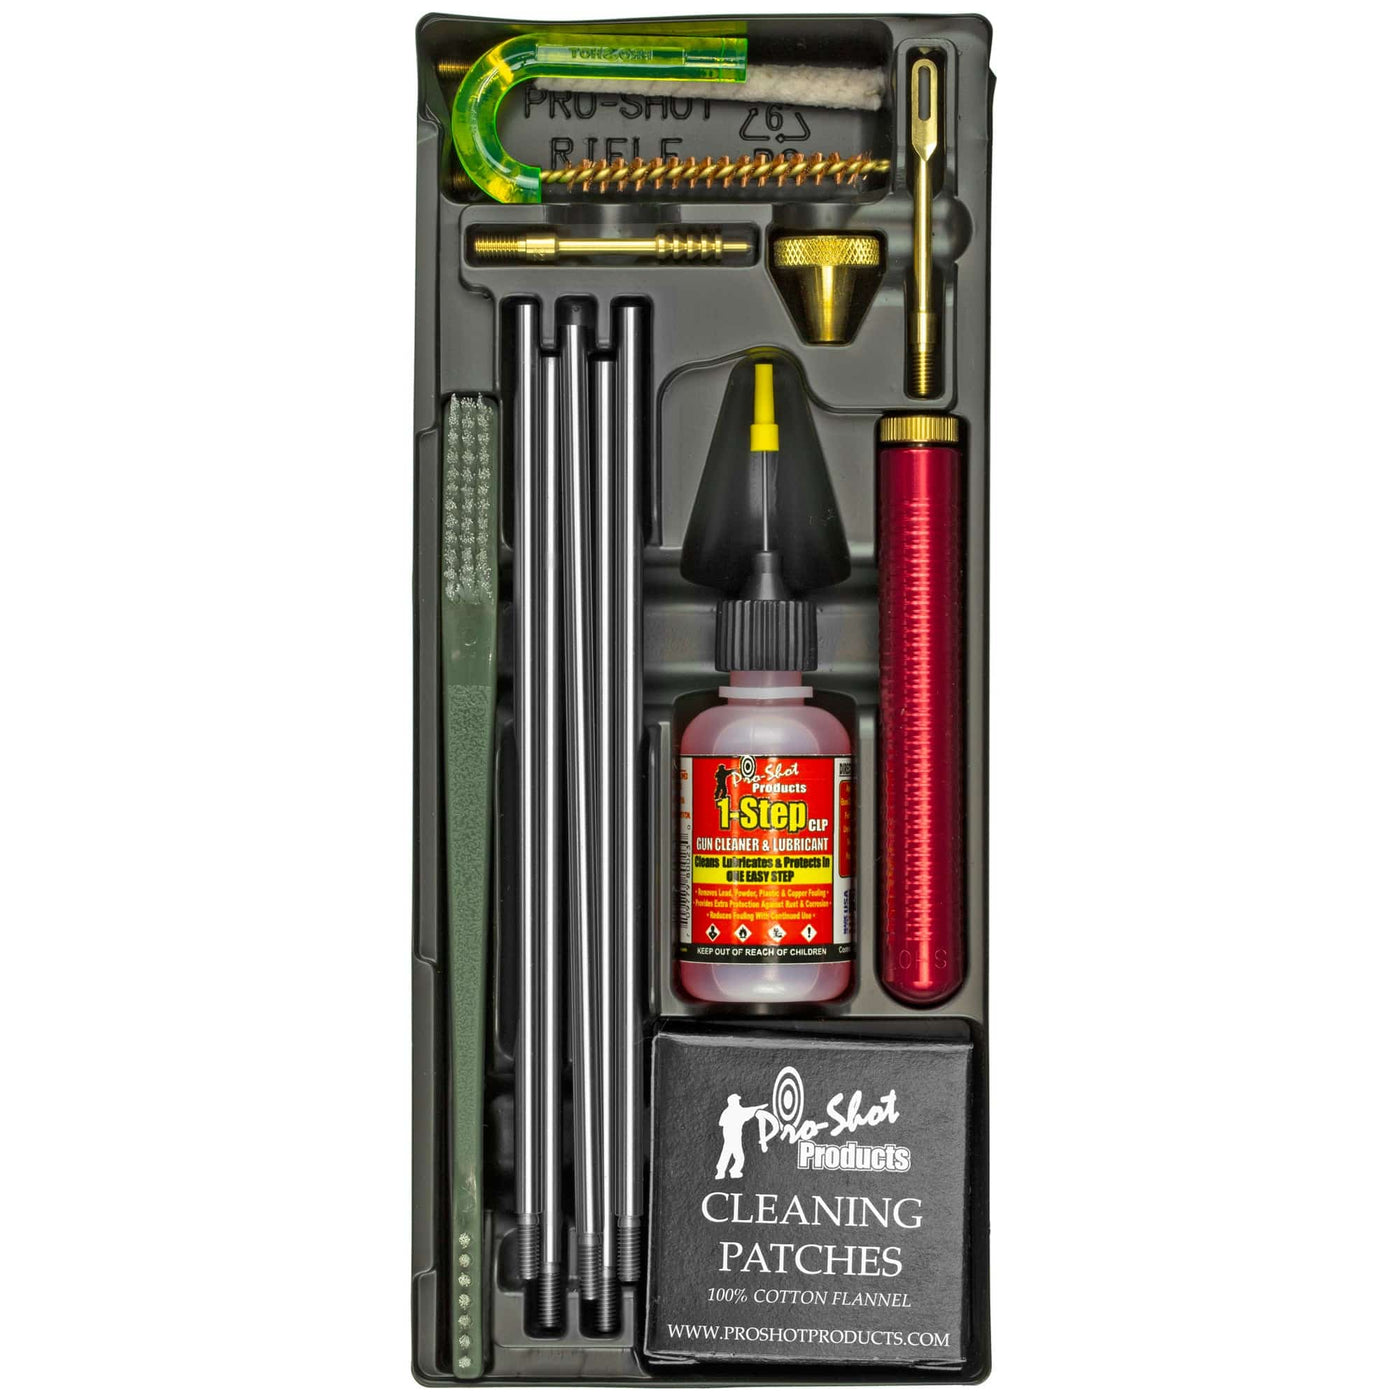 Pro-Shot Products Pro-shot Classic Box Kit .22-.223 Cleaning Equipment